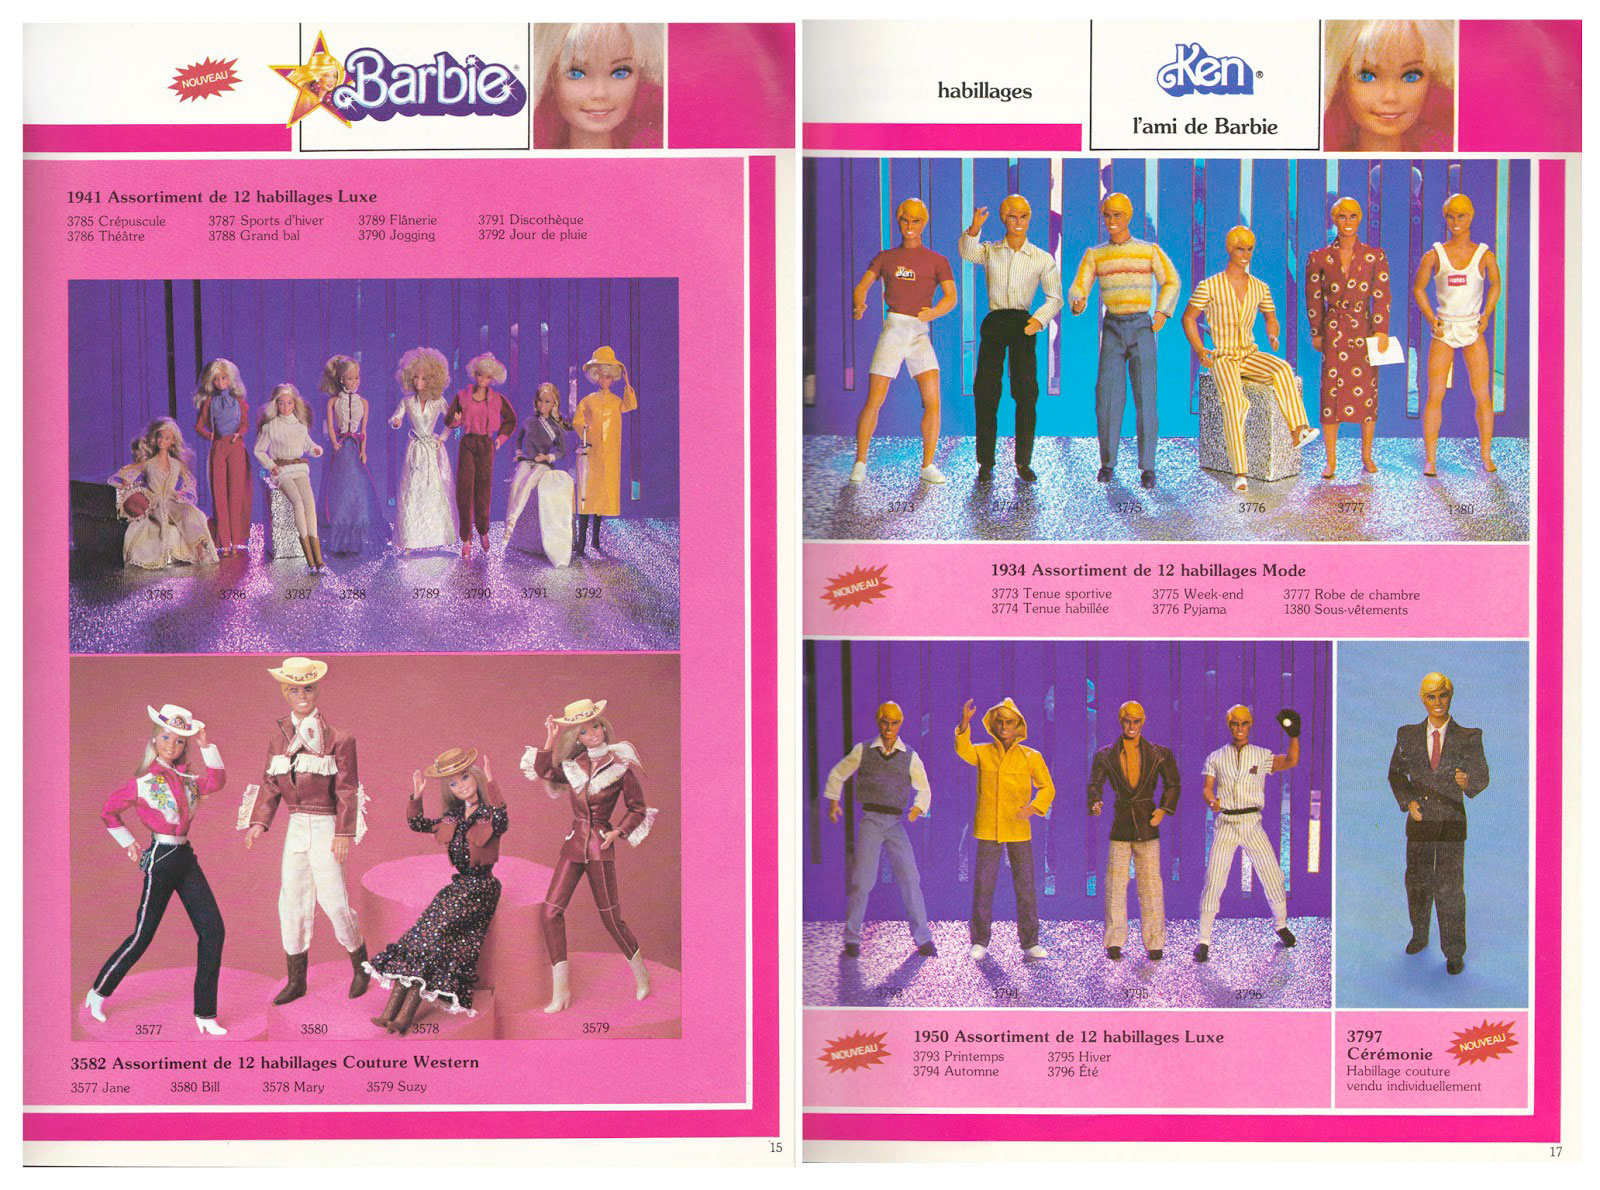 From 1982 French Mattel Toys catalogue